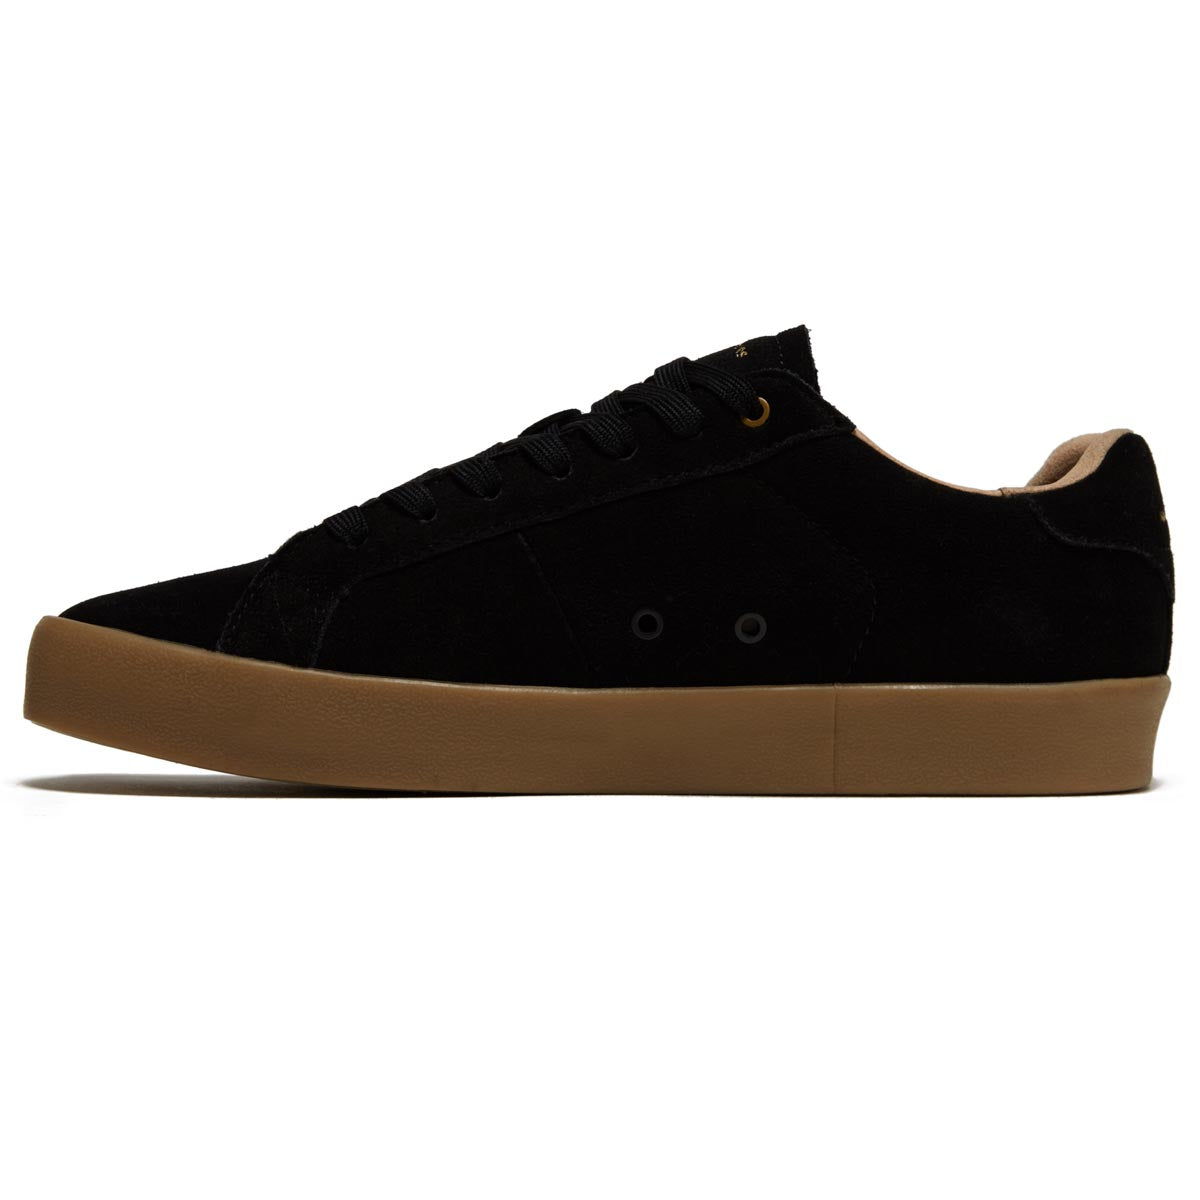 Hours Is Yours C71 Shoes - Black/Gum image 2